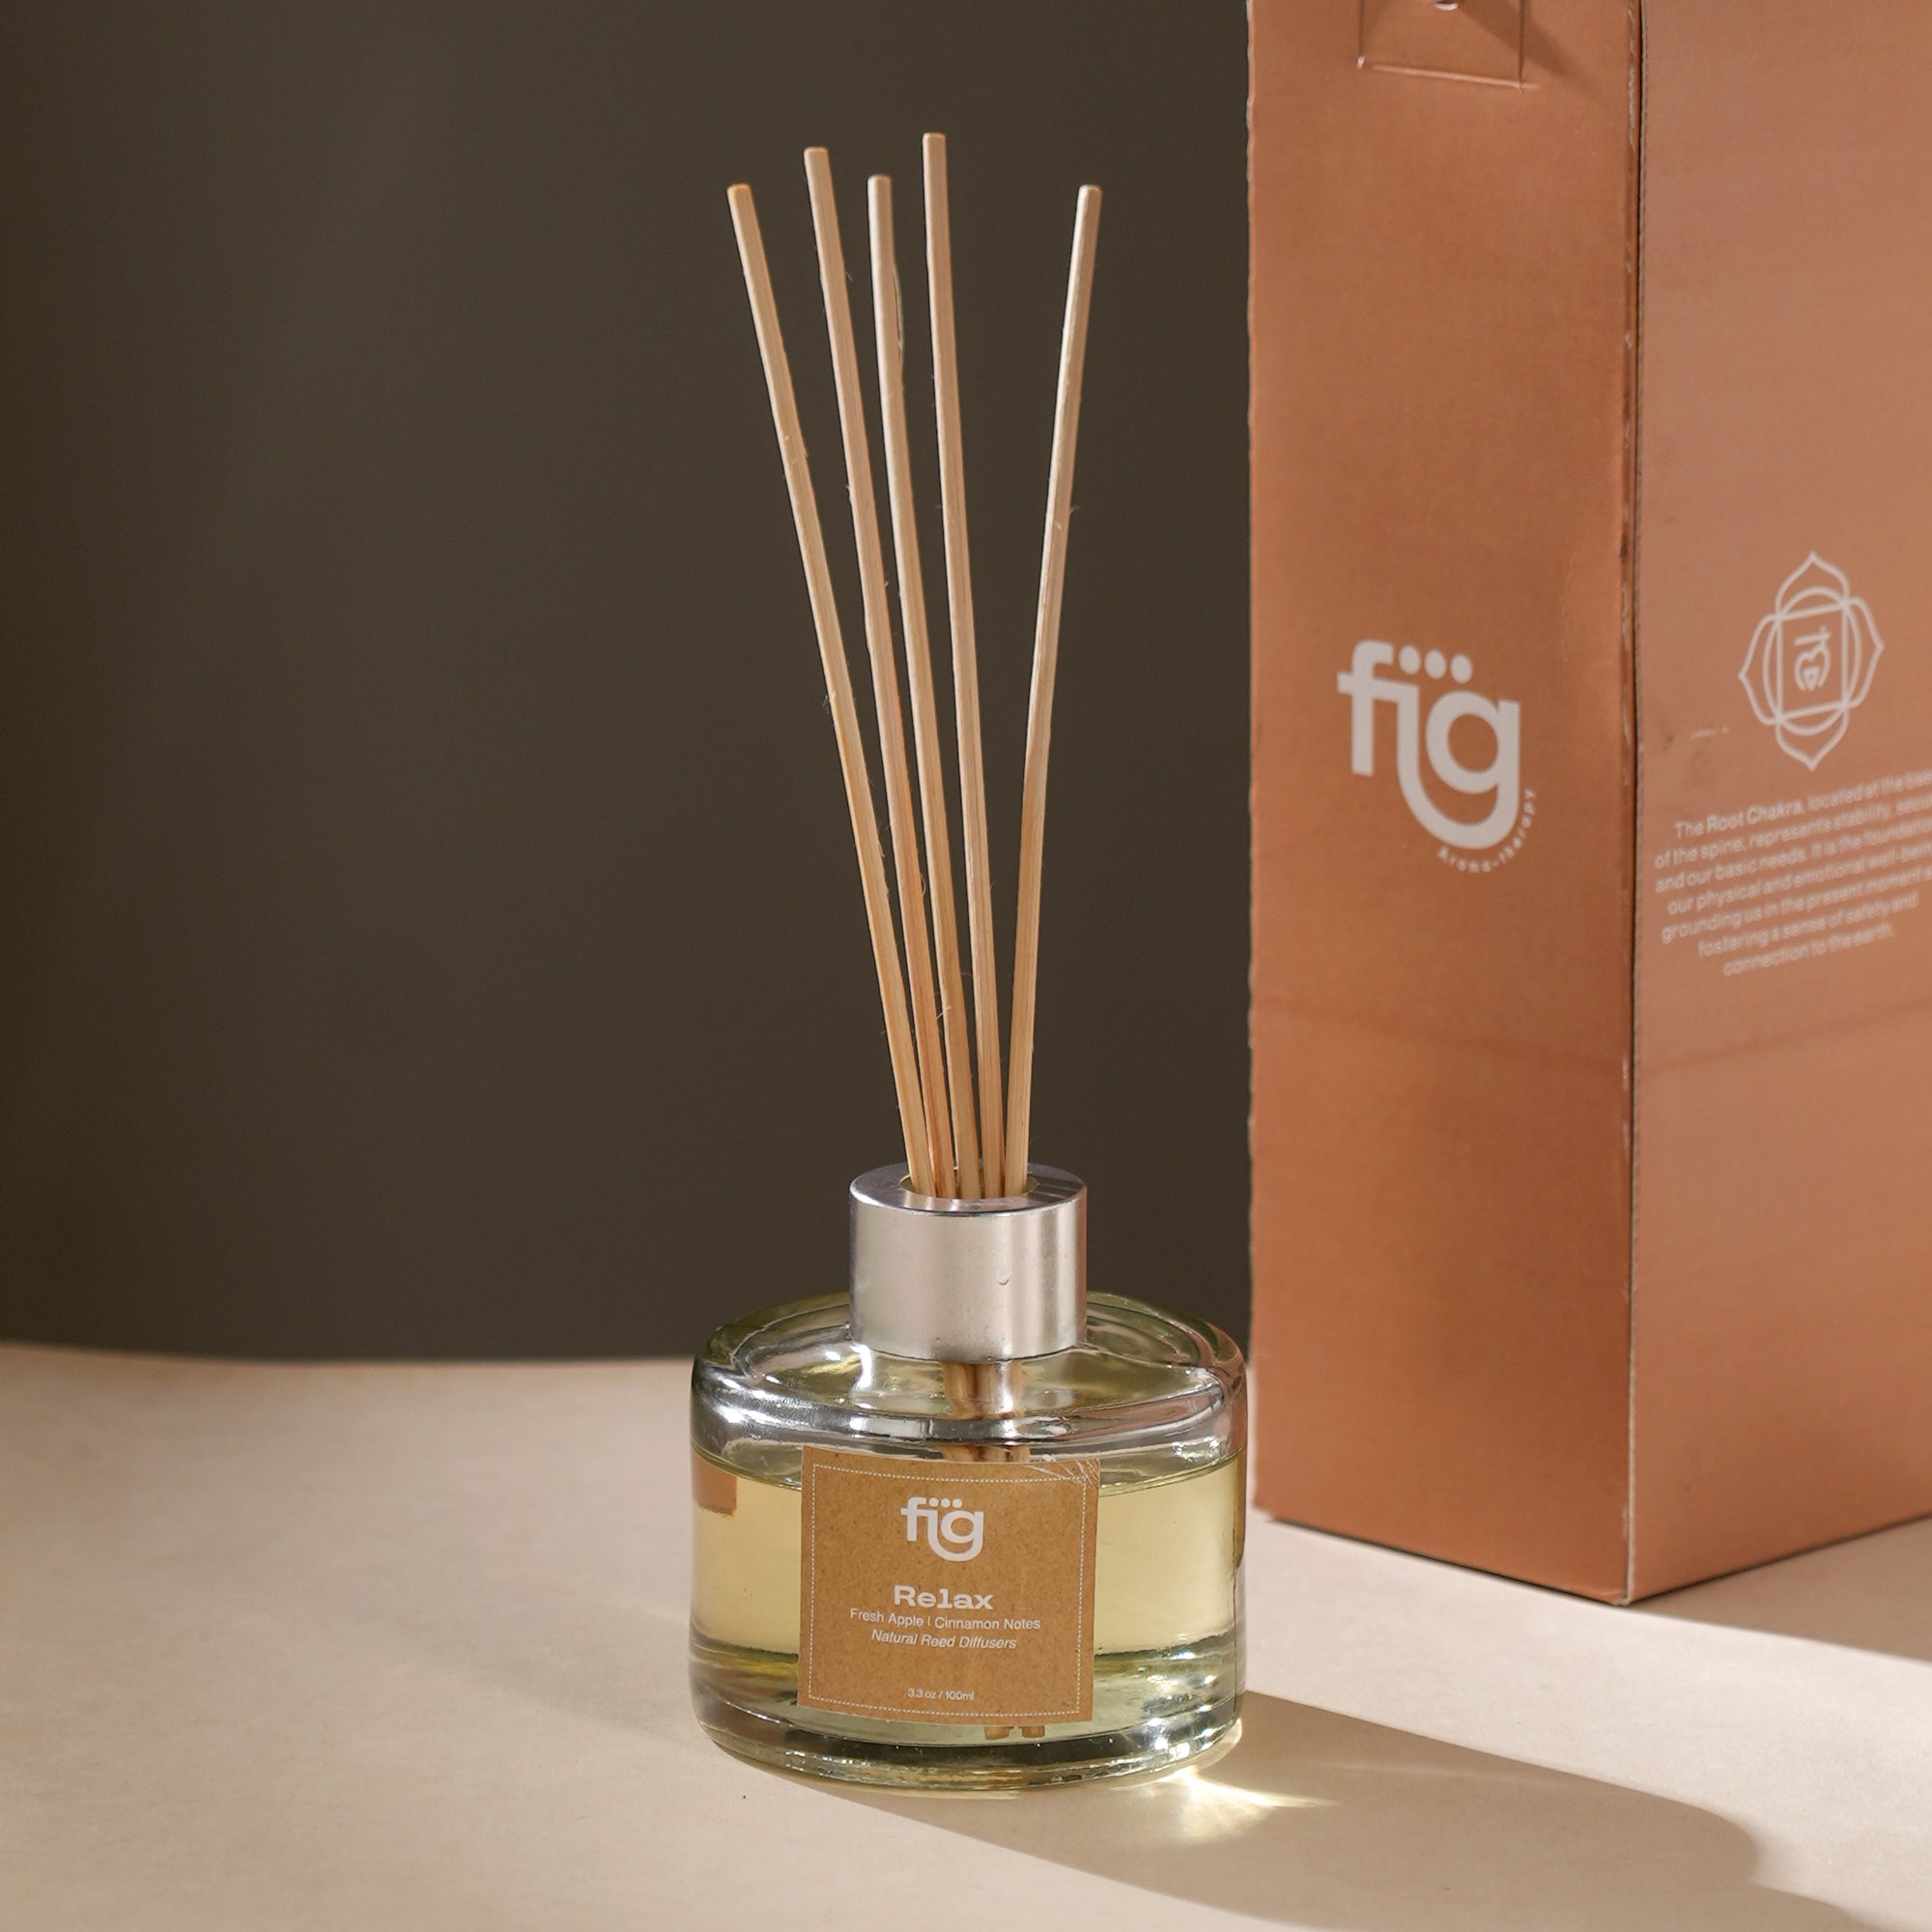 Relax Apple and Cinamon Reed Diffusor - IFRA standard perfumes